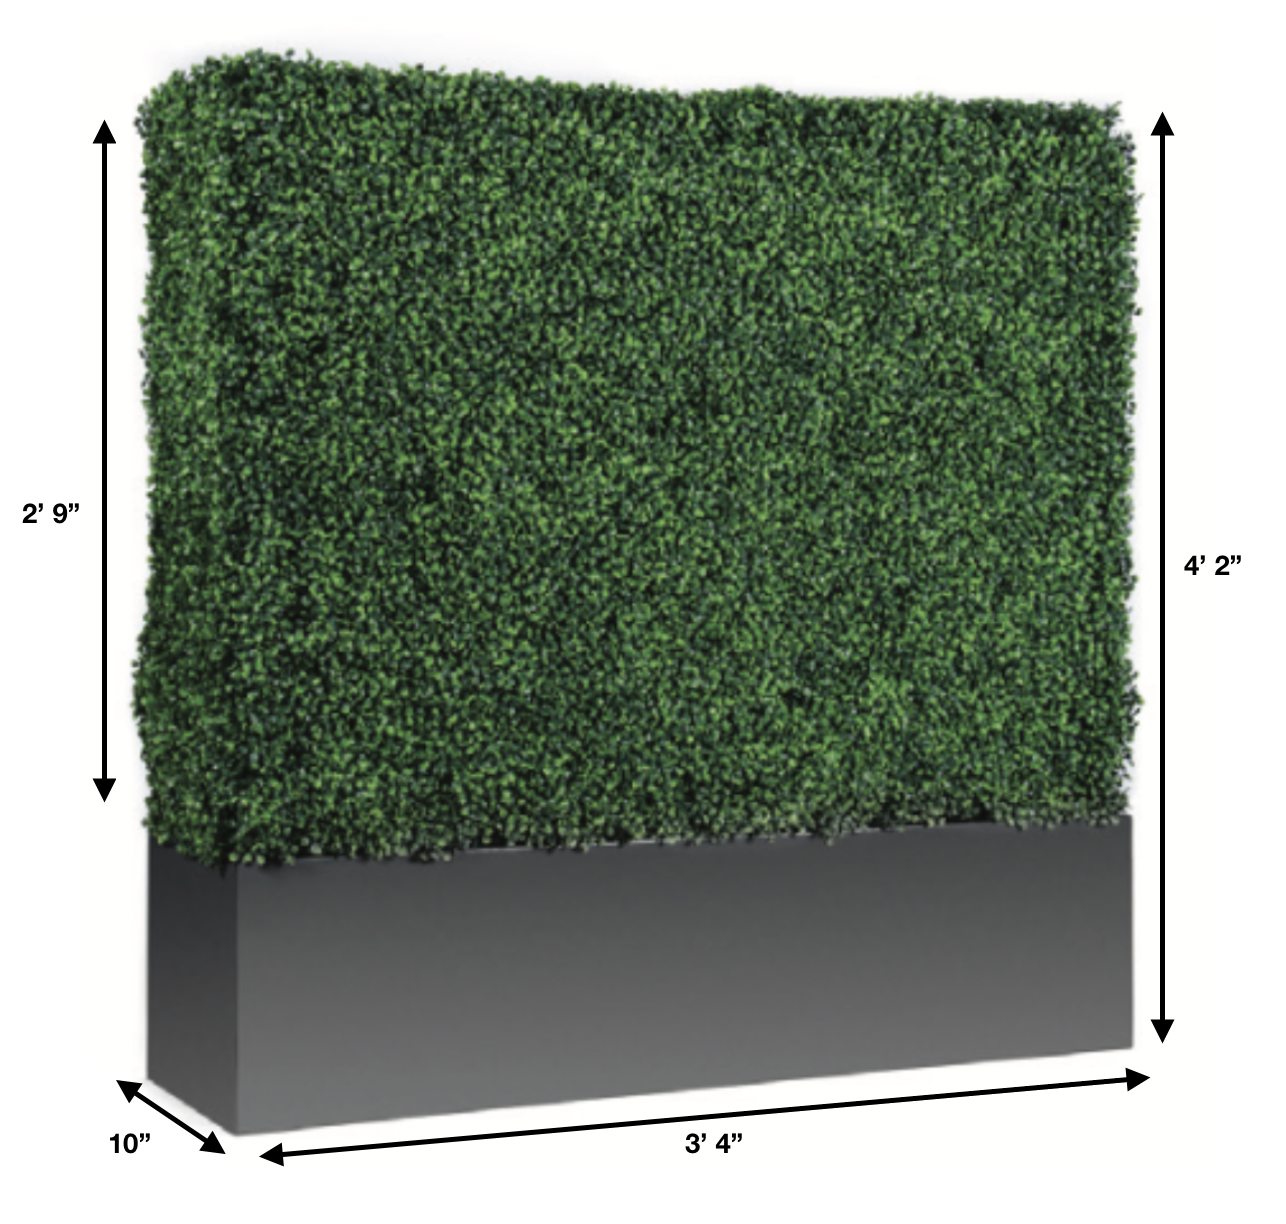 Measurement of Small Hedge